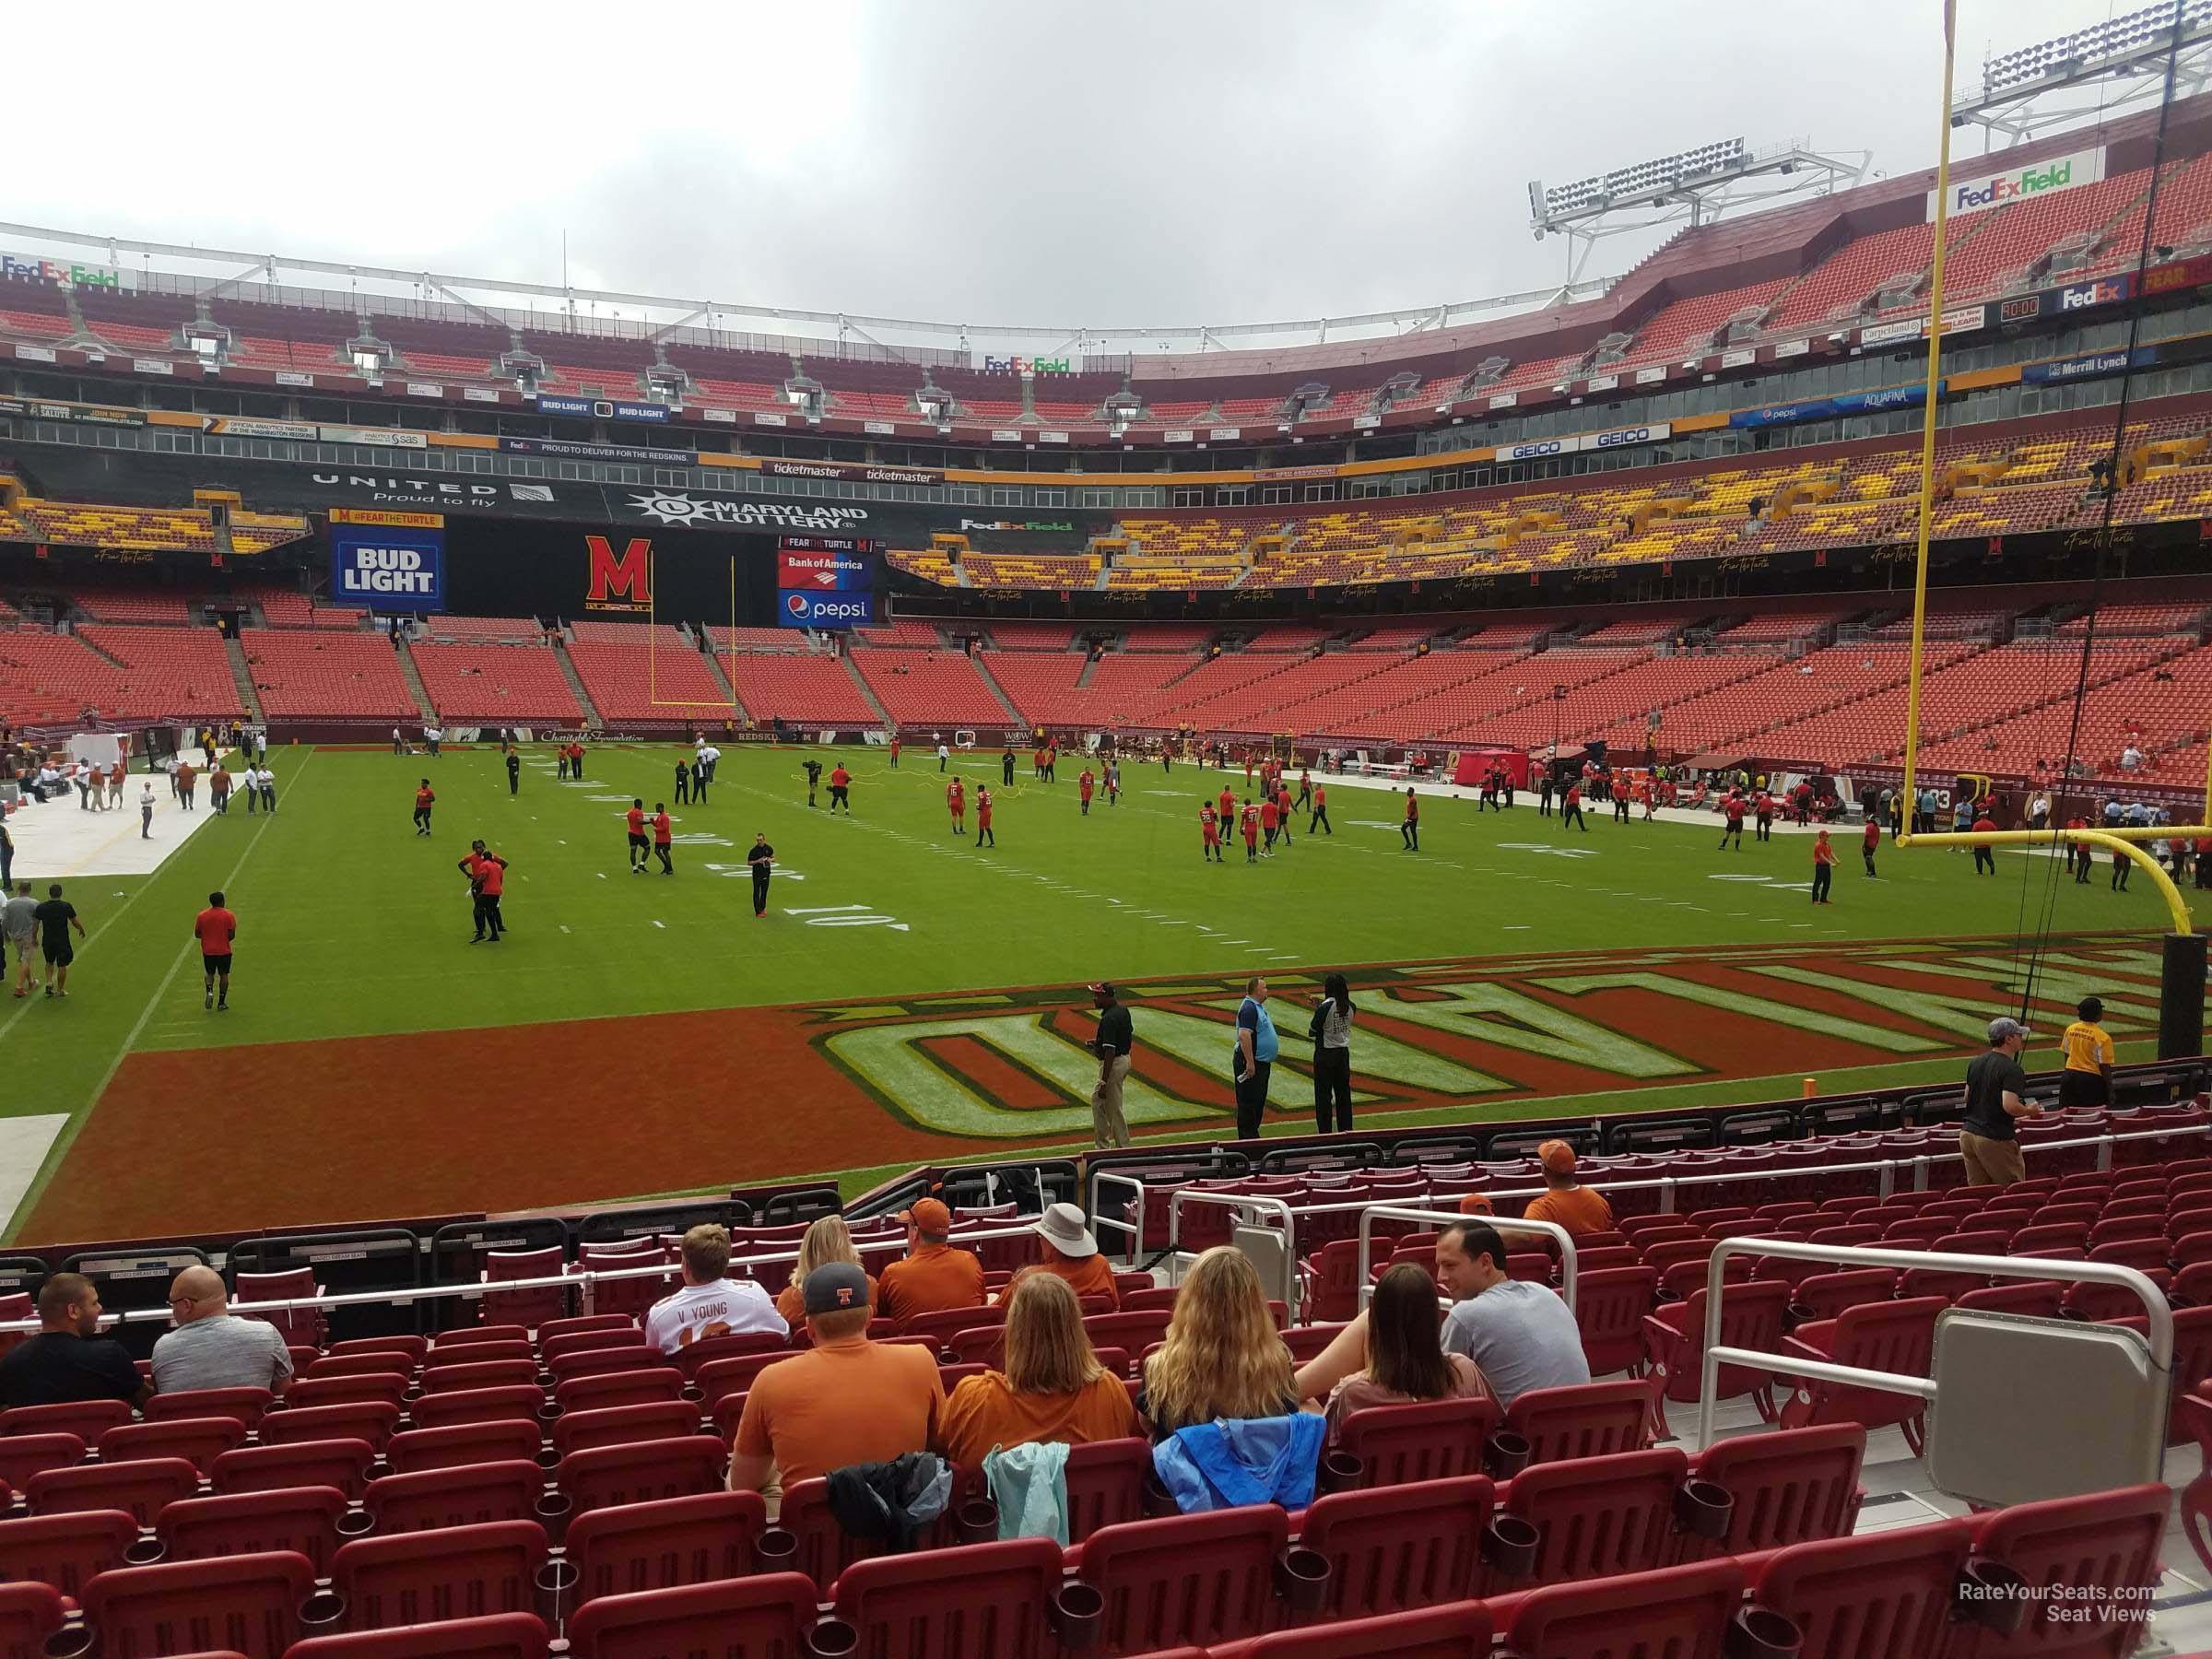 section 113, row 13 seat view  - fedexfield